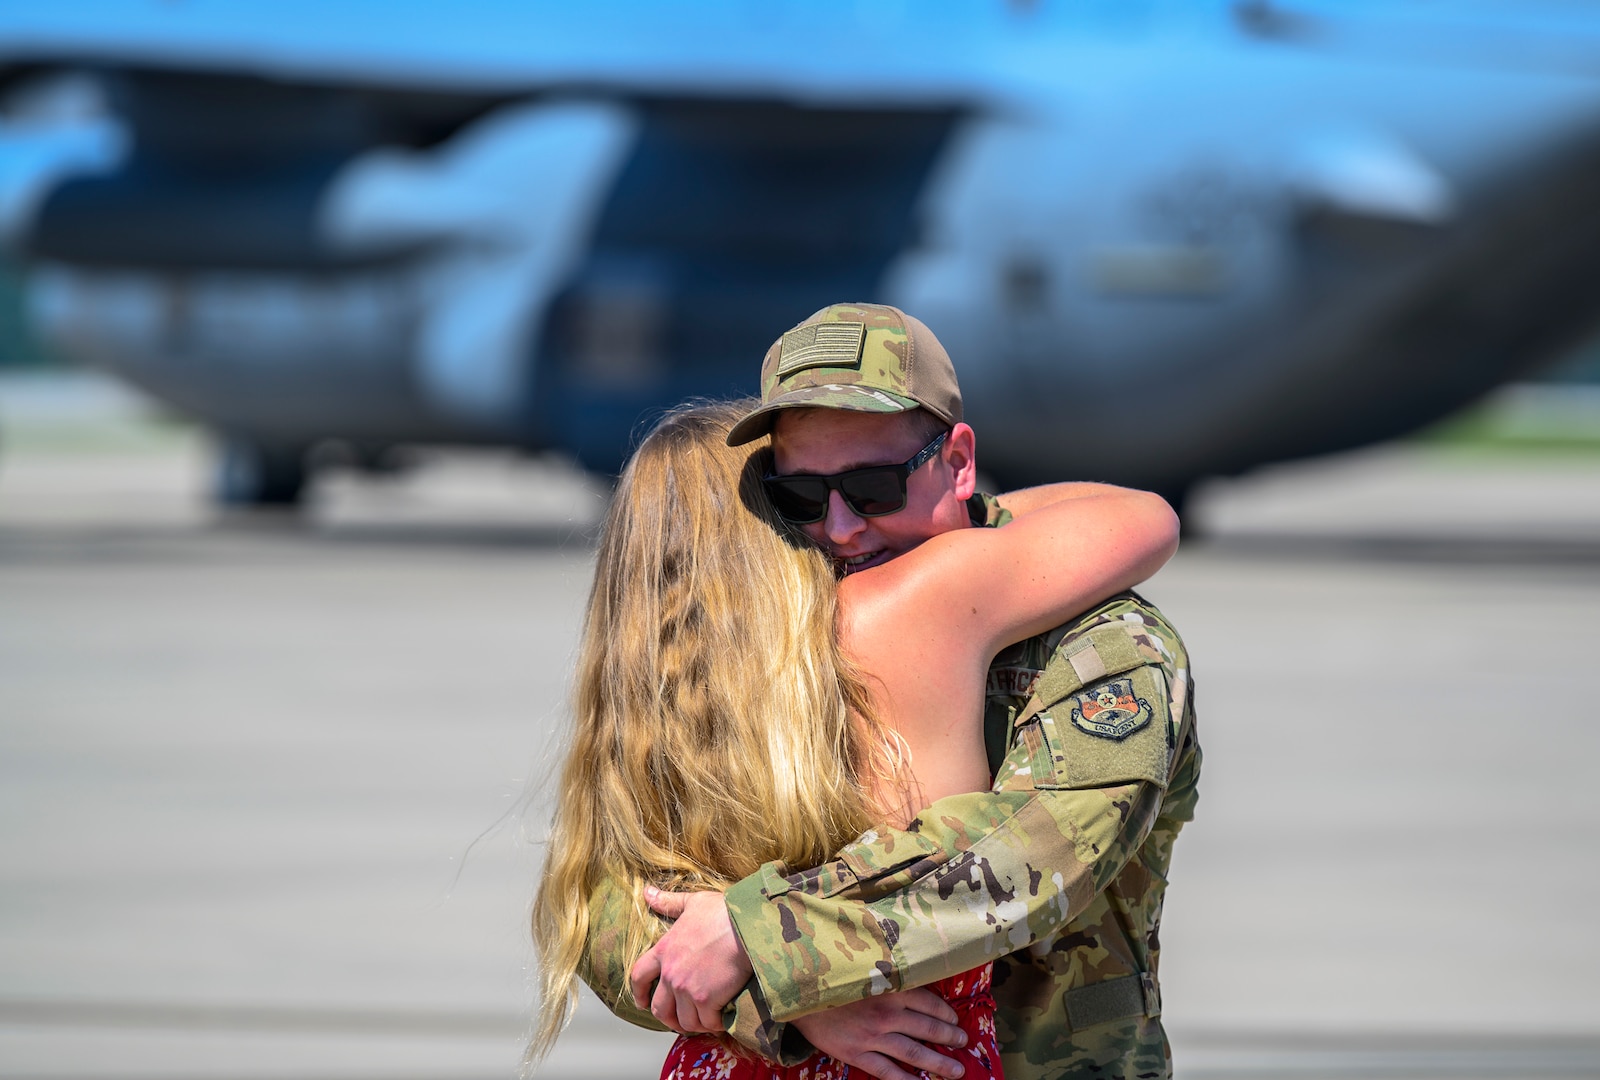 A member of the 130th Airlift Wing hugs a family member upon returning from an overseas deployment July 4, 2020, at McLaughlin Air National Guard Base in Charleston, W.Va. More than 70 members of the 130th Airlift Wing returned from Kuwait where they provided support for C-130H operations in the Middle East Area of Responsibility. (U.S. Air National Guard photo by Master Sgt. De-Juan Haley)